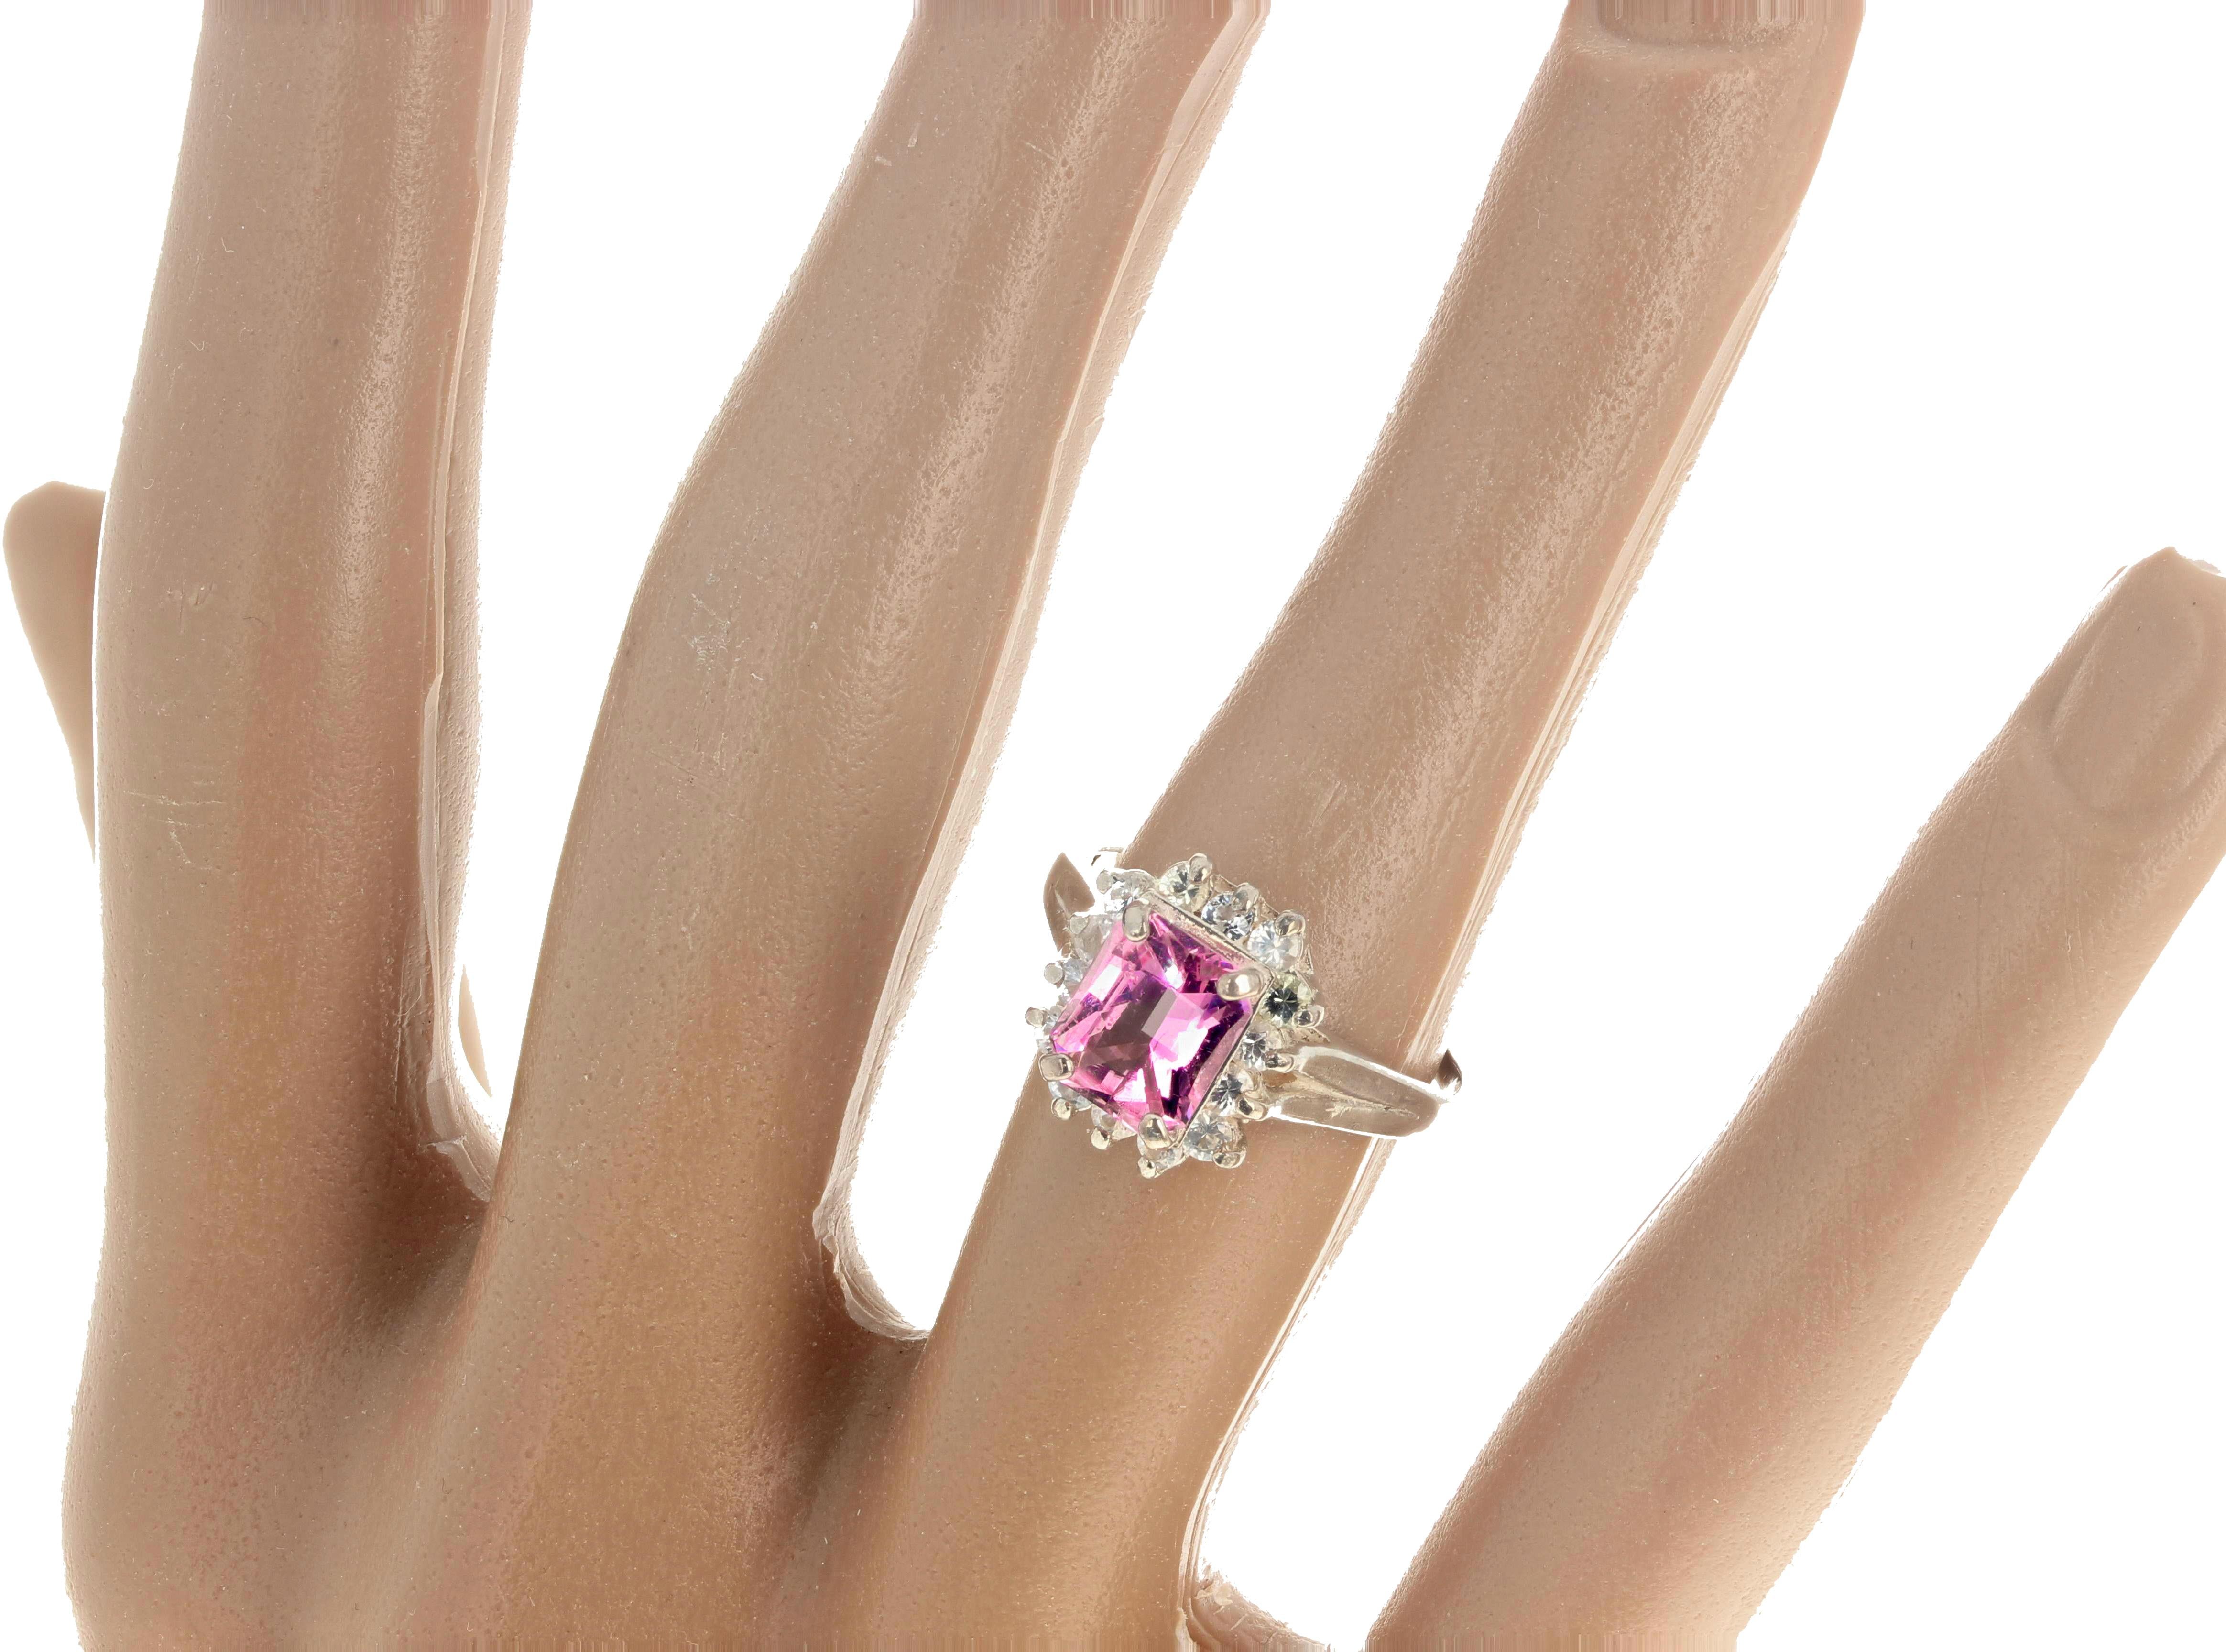 This beautiful 1 Carat Pink Tourmaline (7.6mm x 6.4 mm) is surrounded by beautiful glittering natural little white Sapphires set in this sterling silver ring size 7 (sizable for free). 